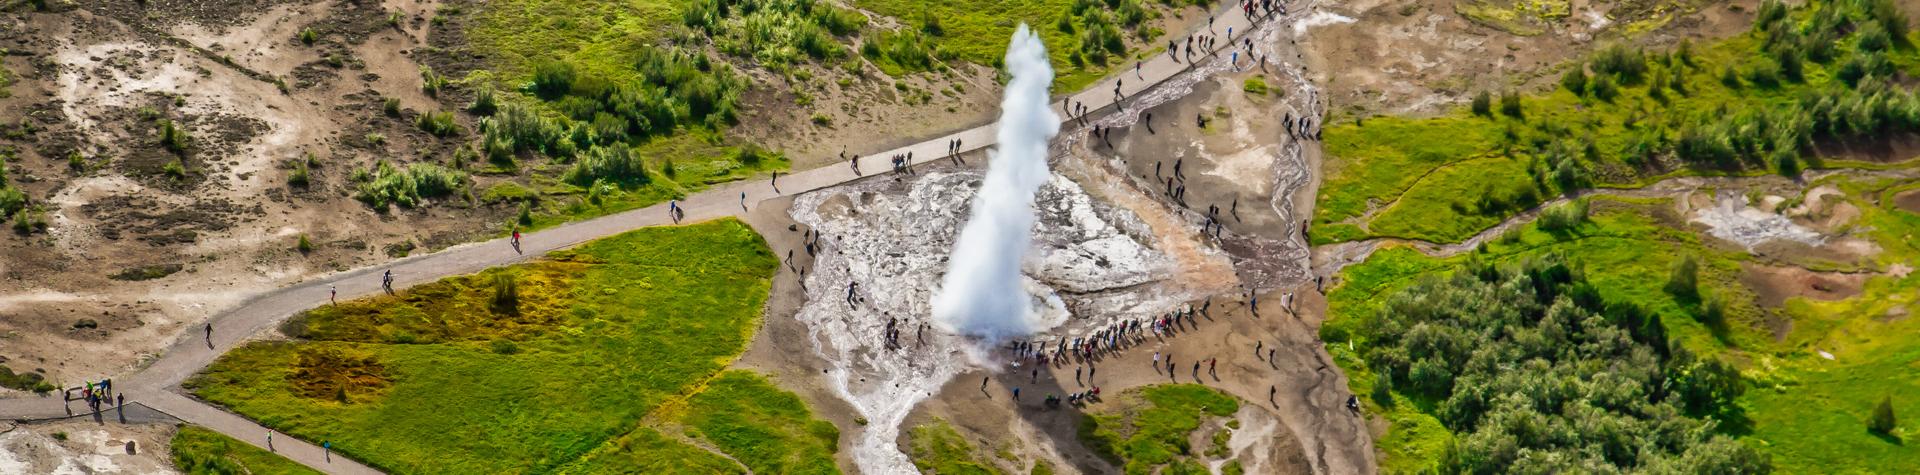 Geysir from the above, Iceland.